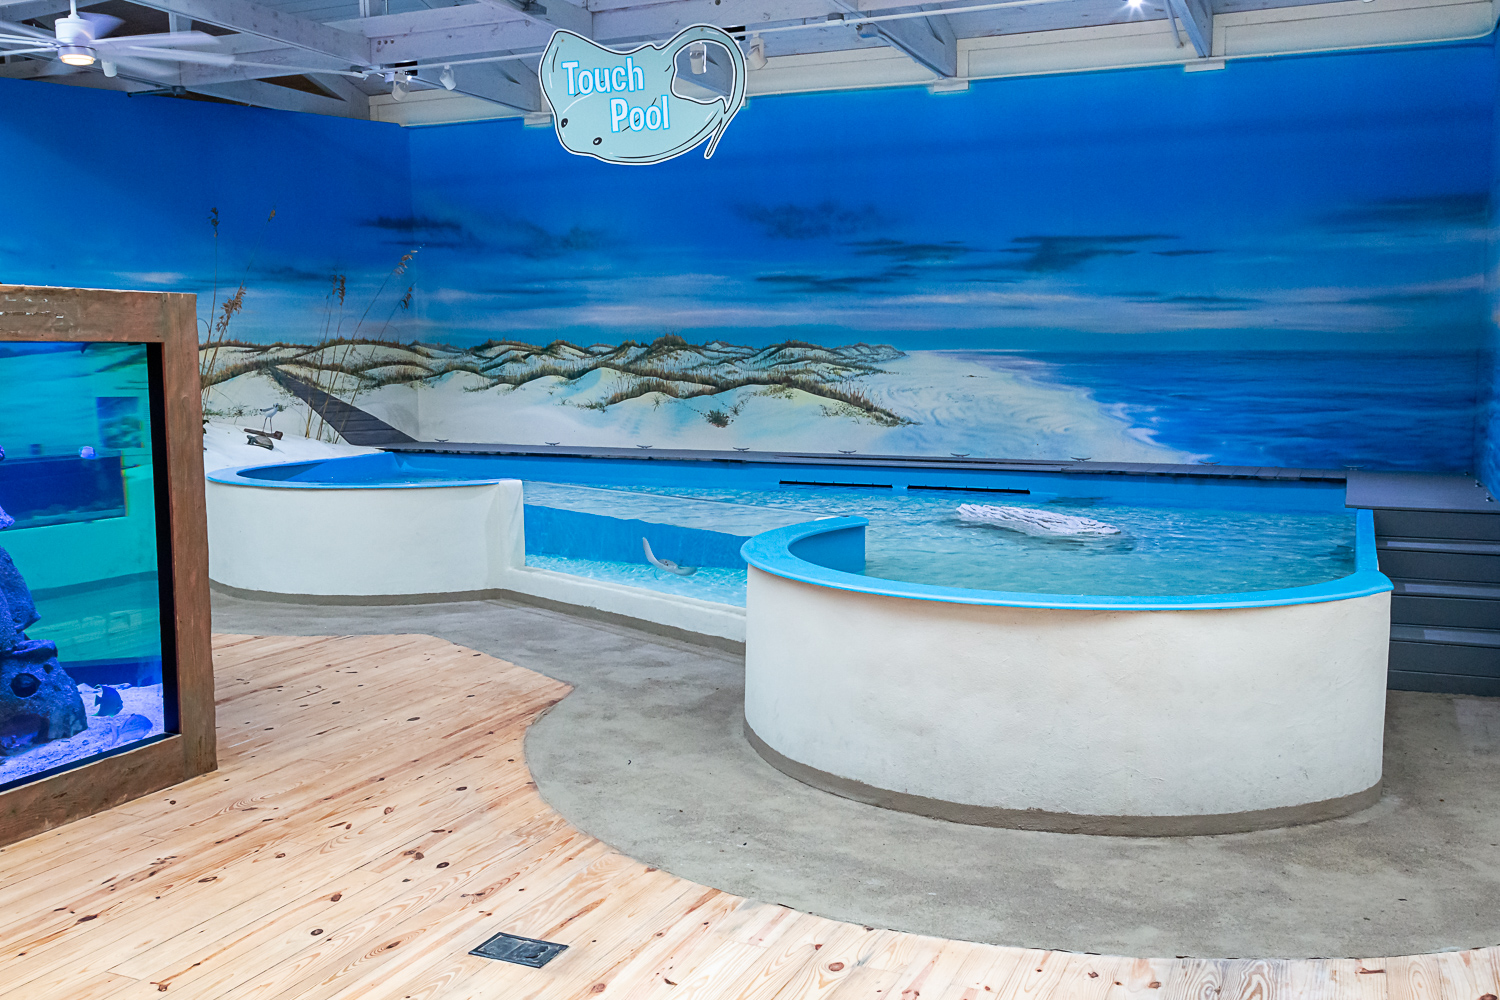 touch pool exhibit with artificial reef behind it